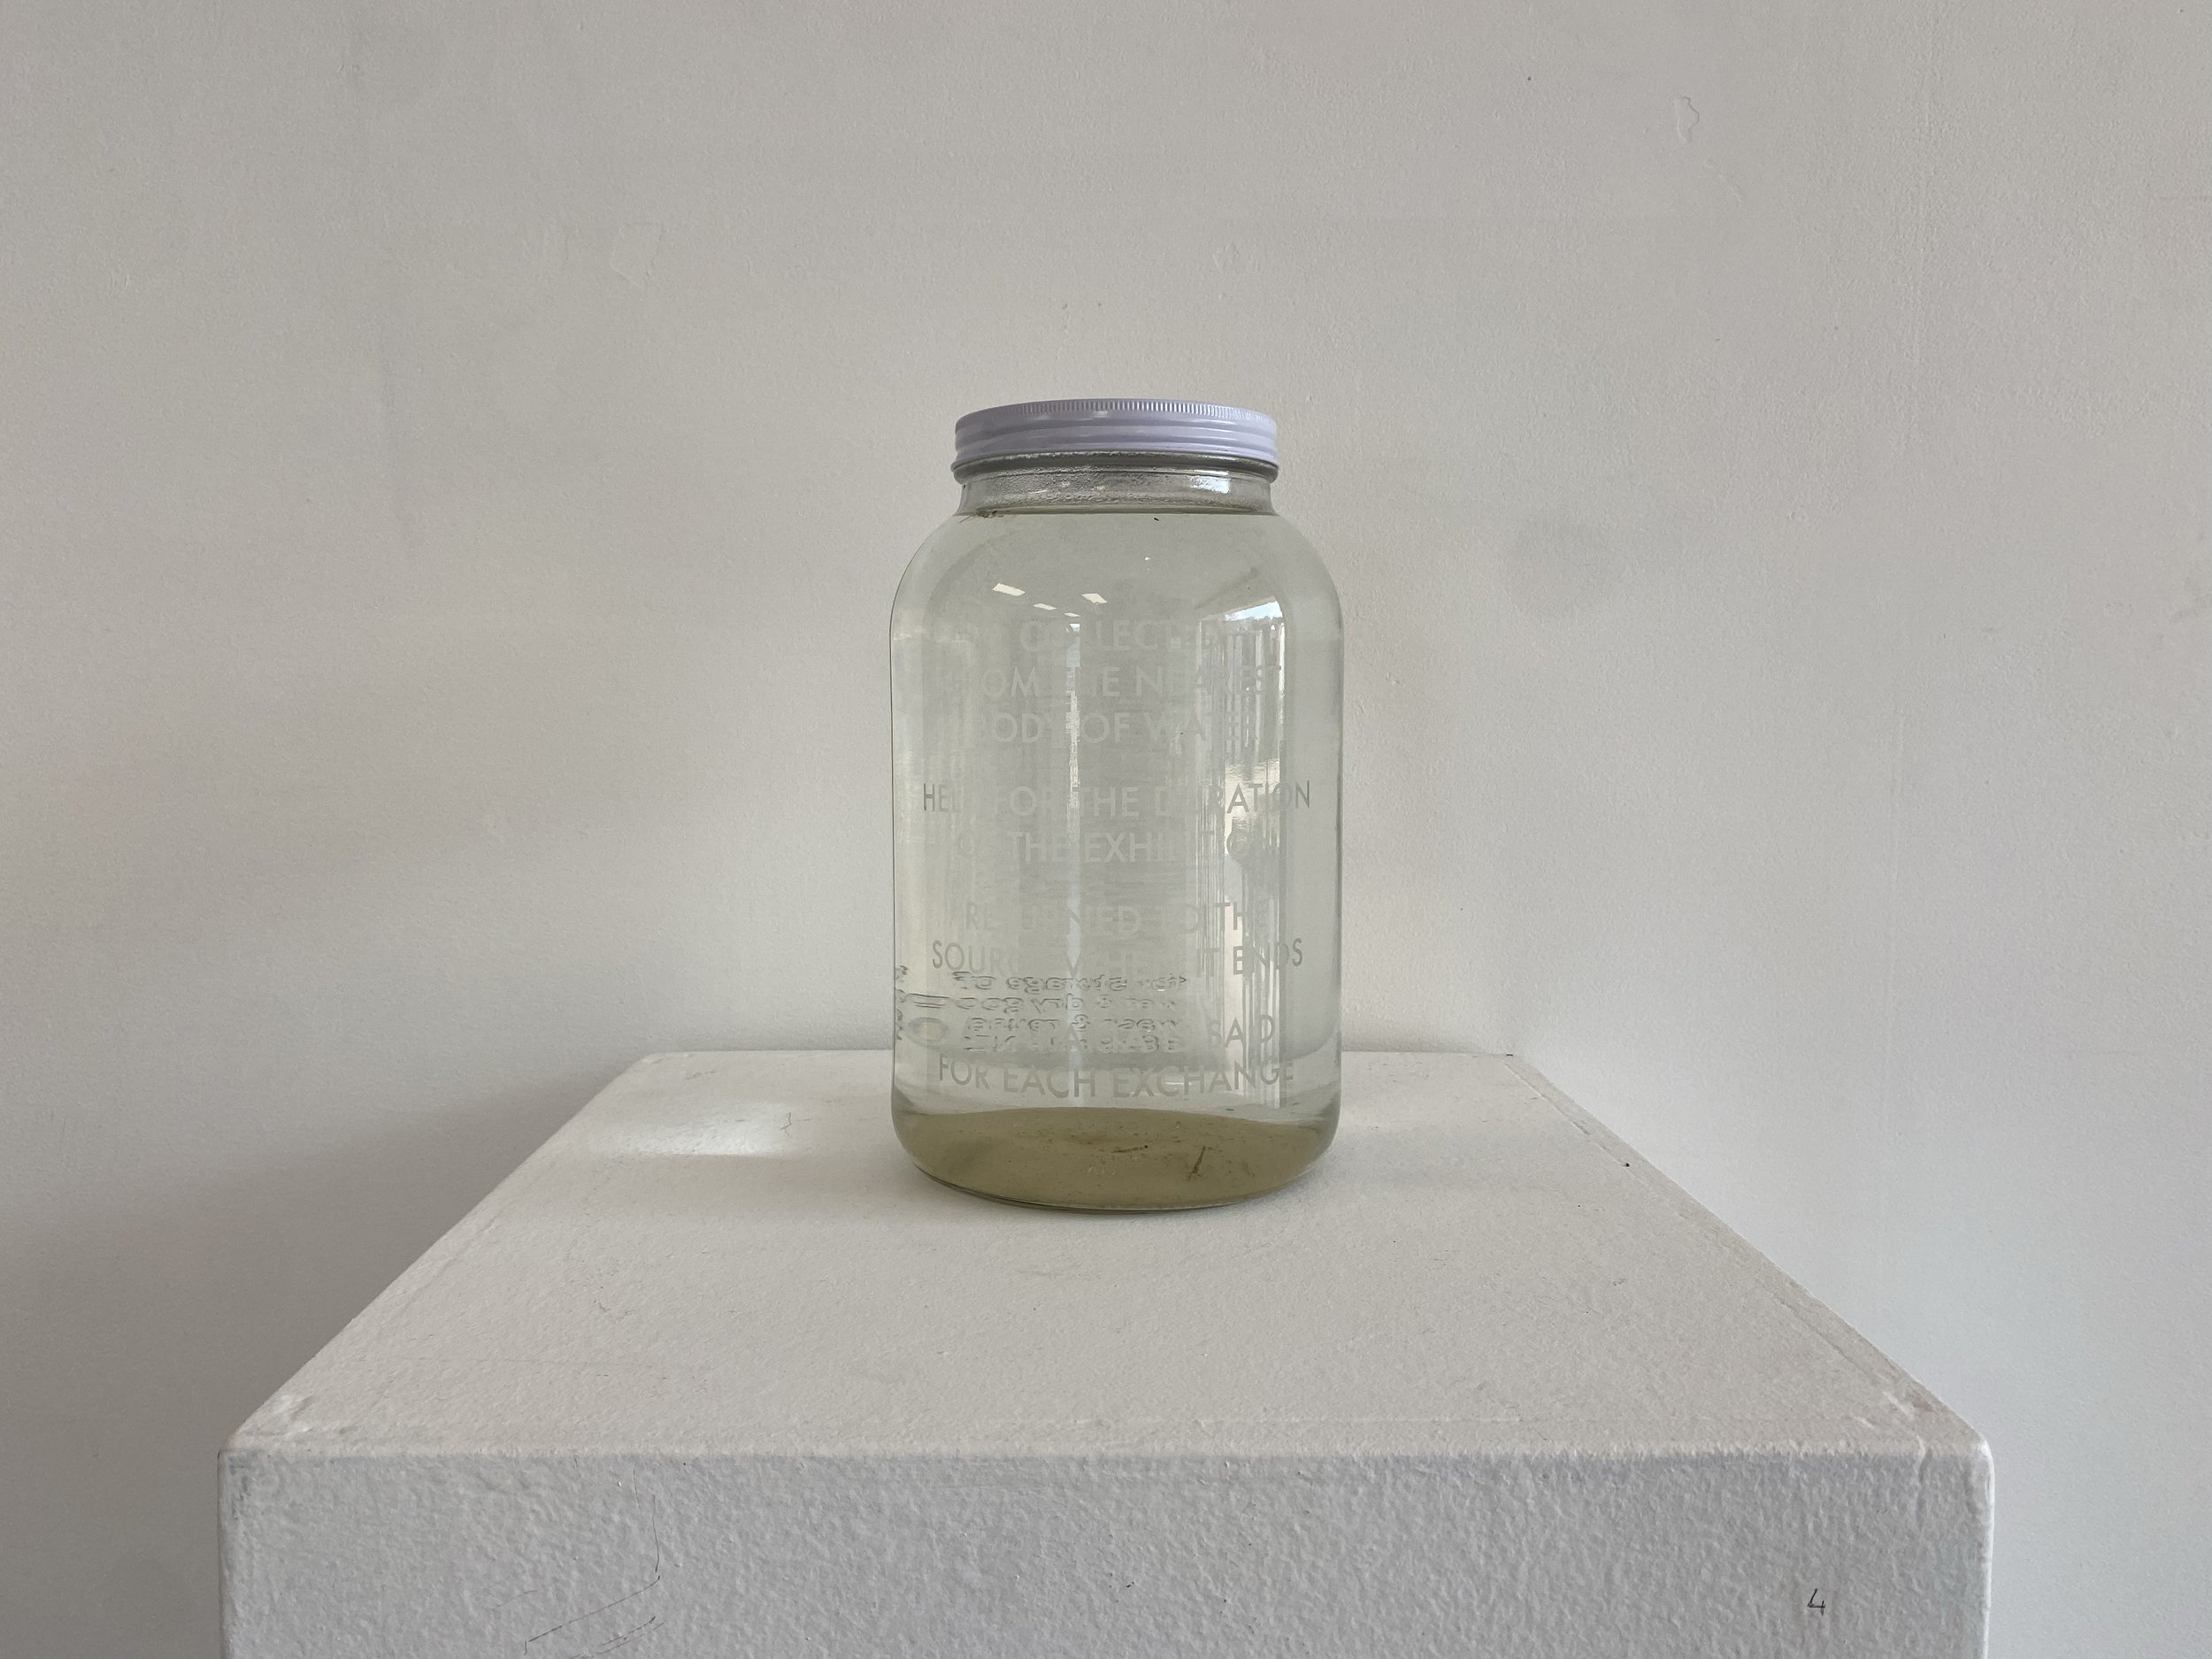 Held, 2021, etched glass and water collected from the nearest source 